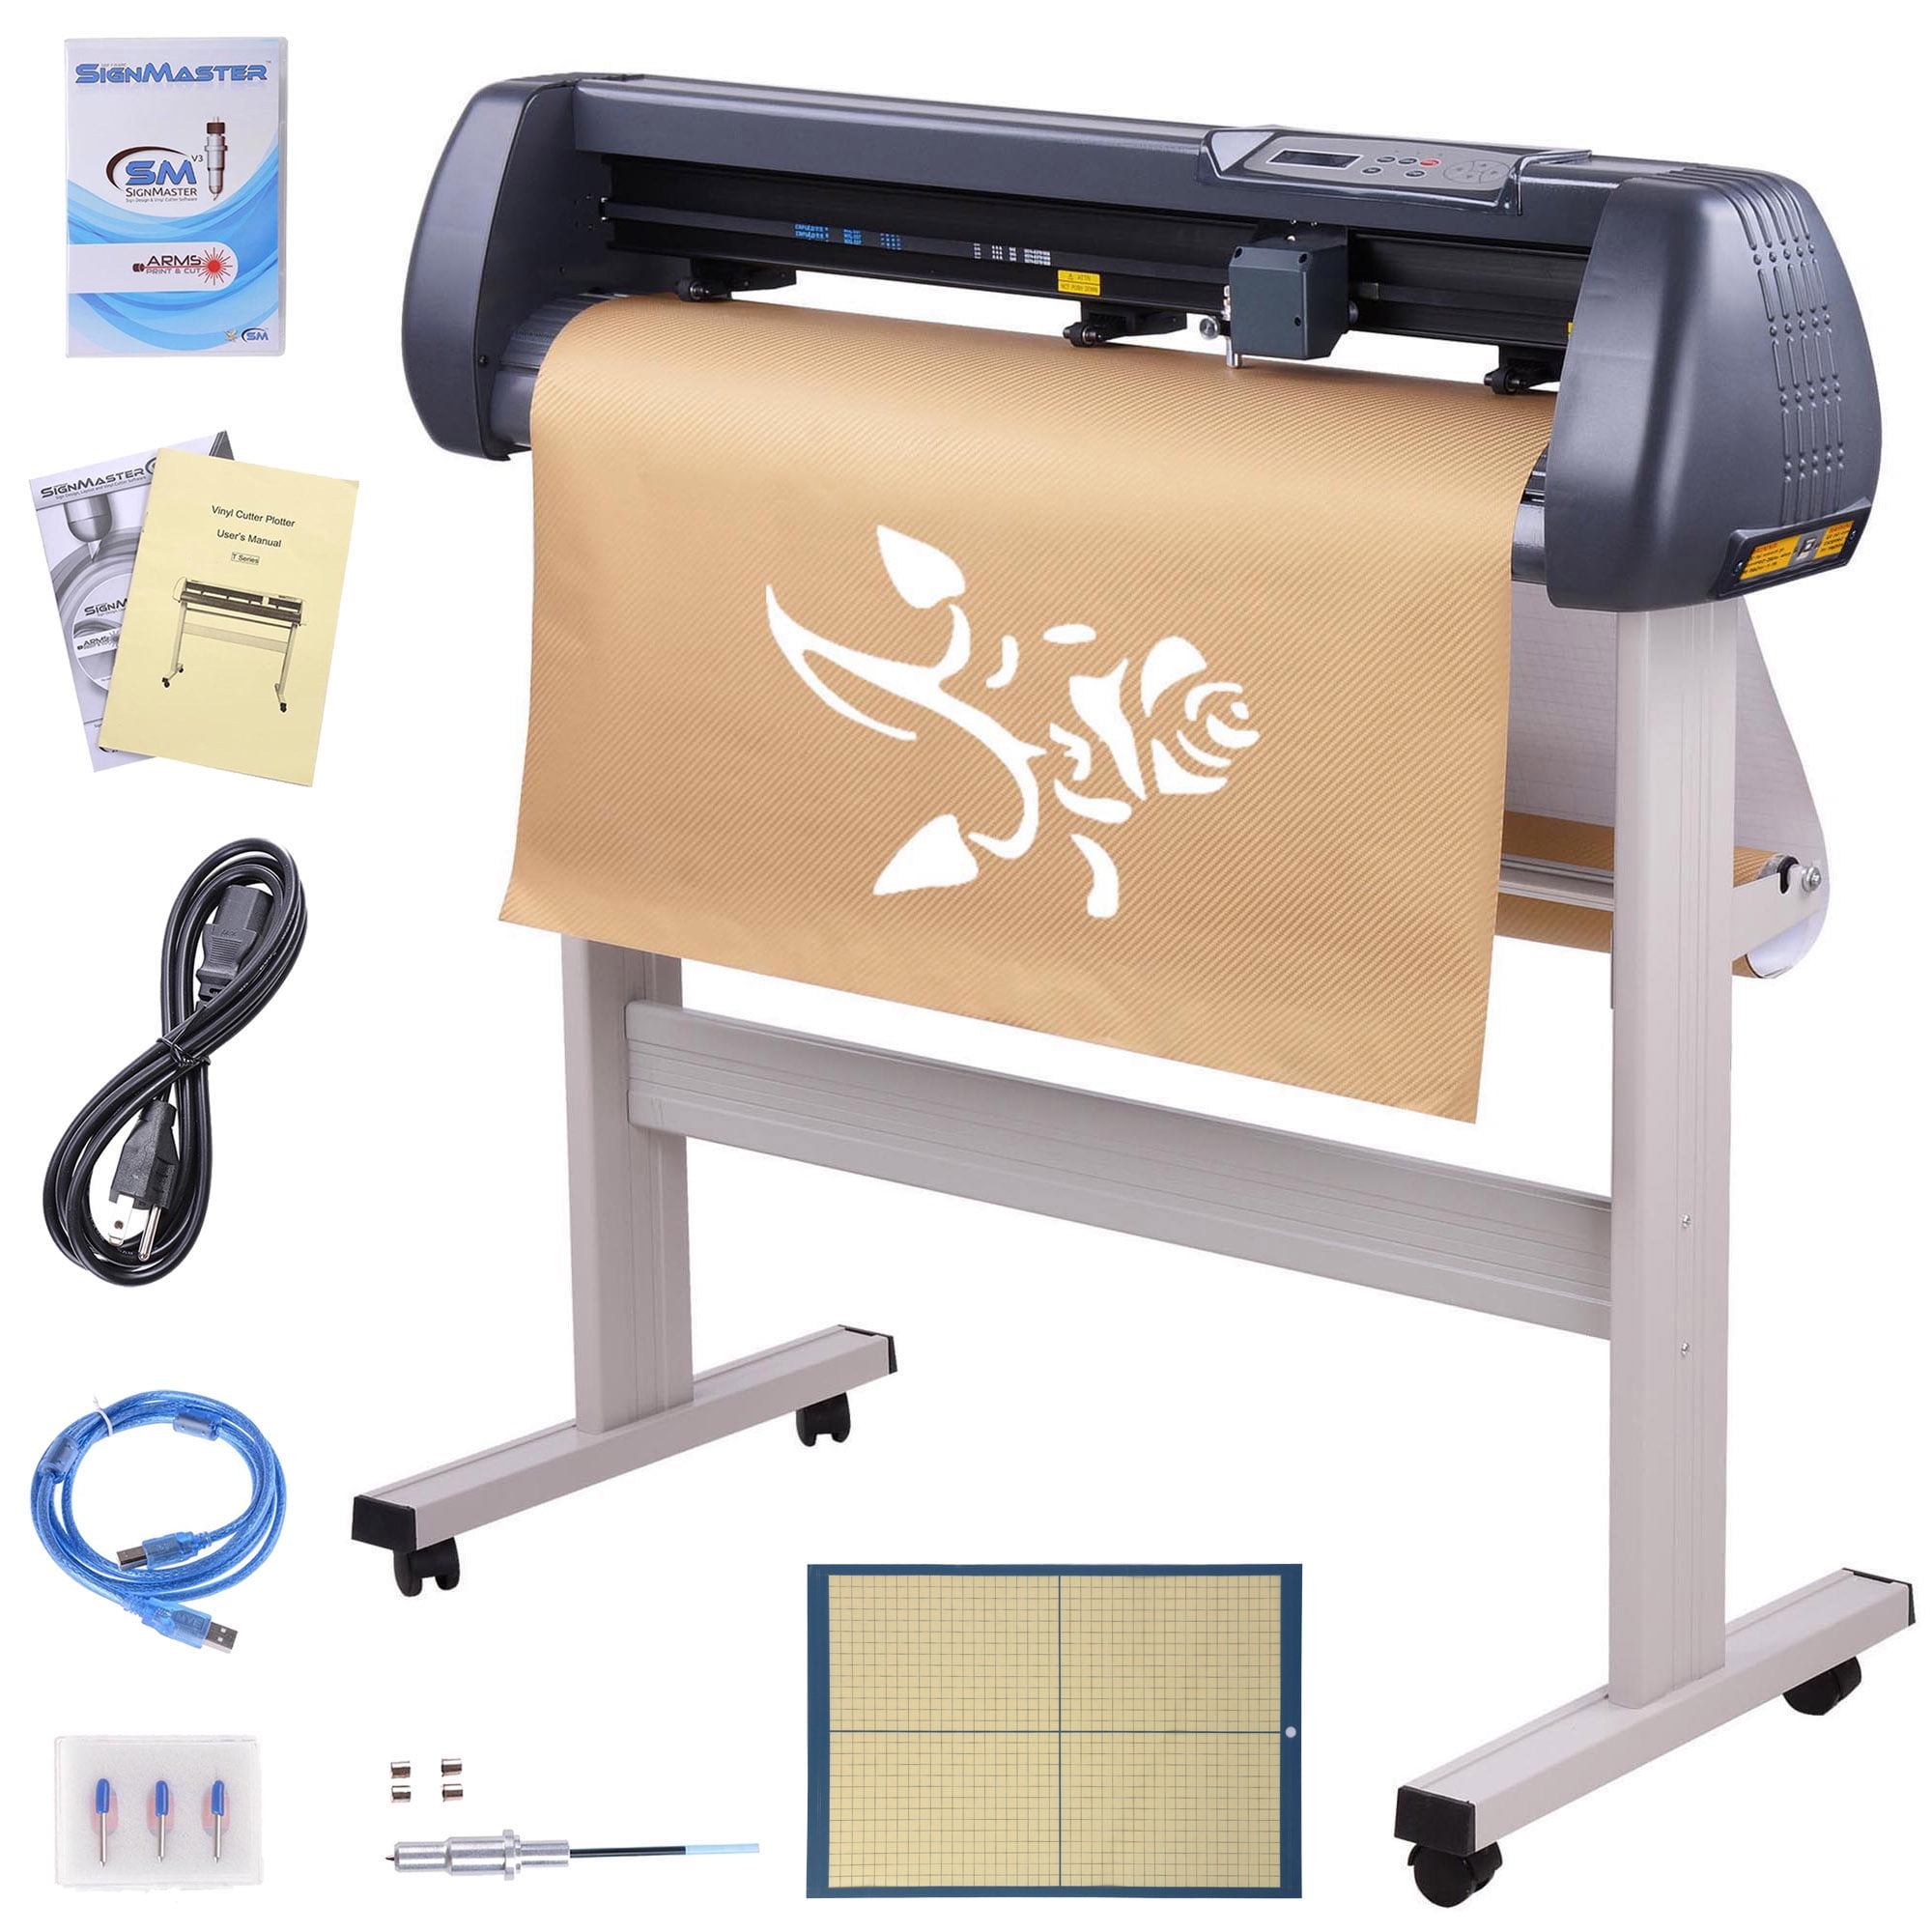 mikro Enumerate Udlevering Yescom 34" Vinyl Cutter Machine Cutting Plotter Sign Making with Signmaster  Software Adjustable Force Speed - Walmart.com